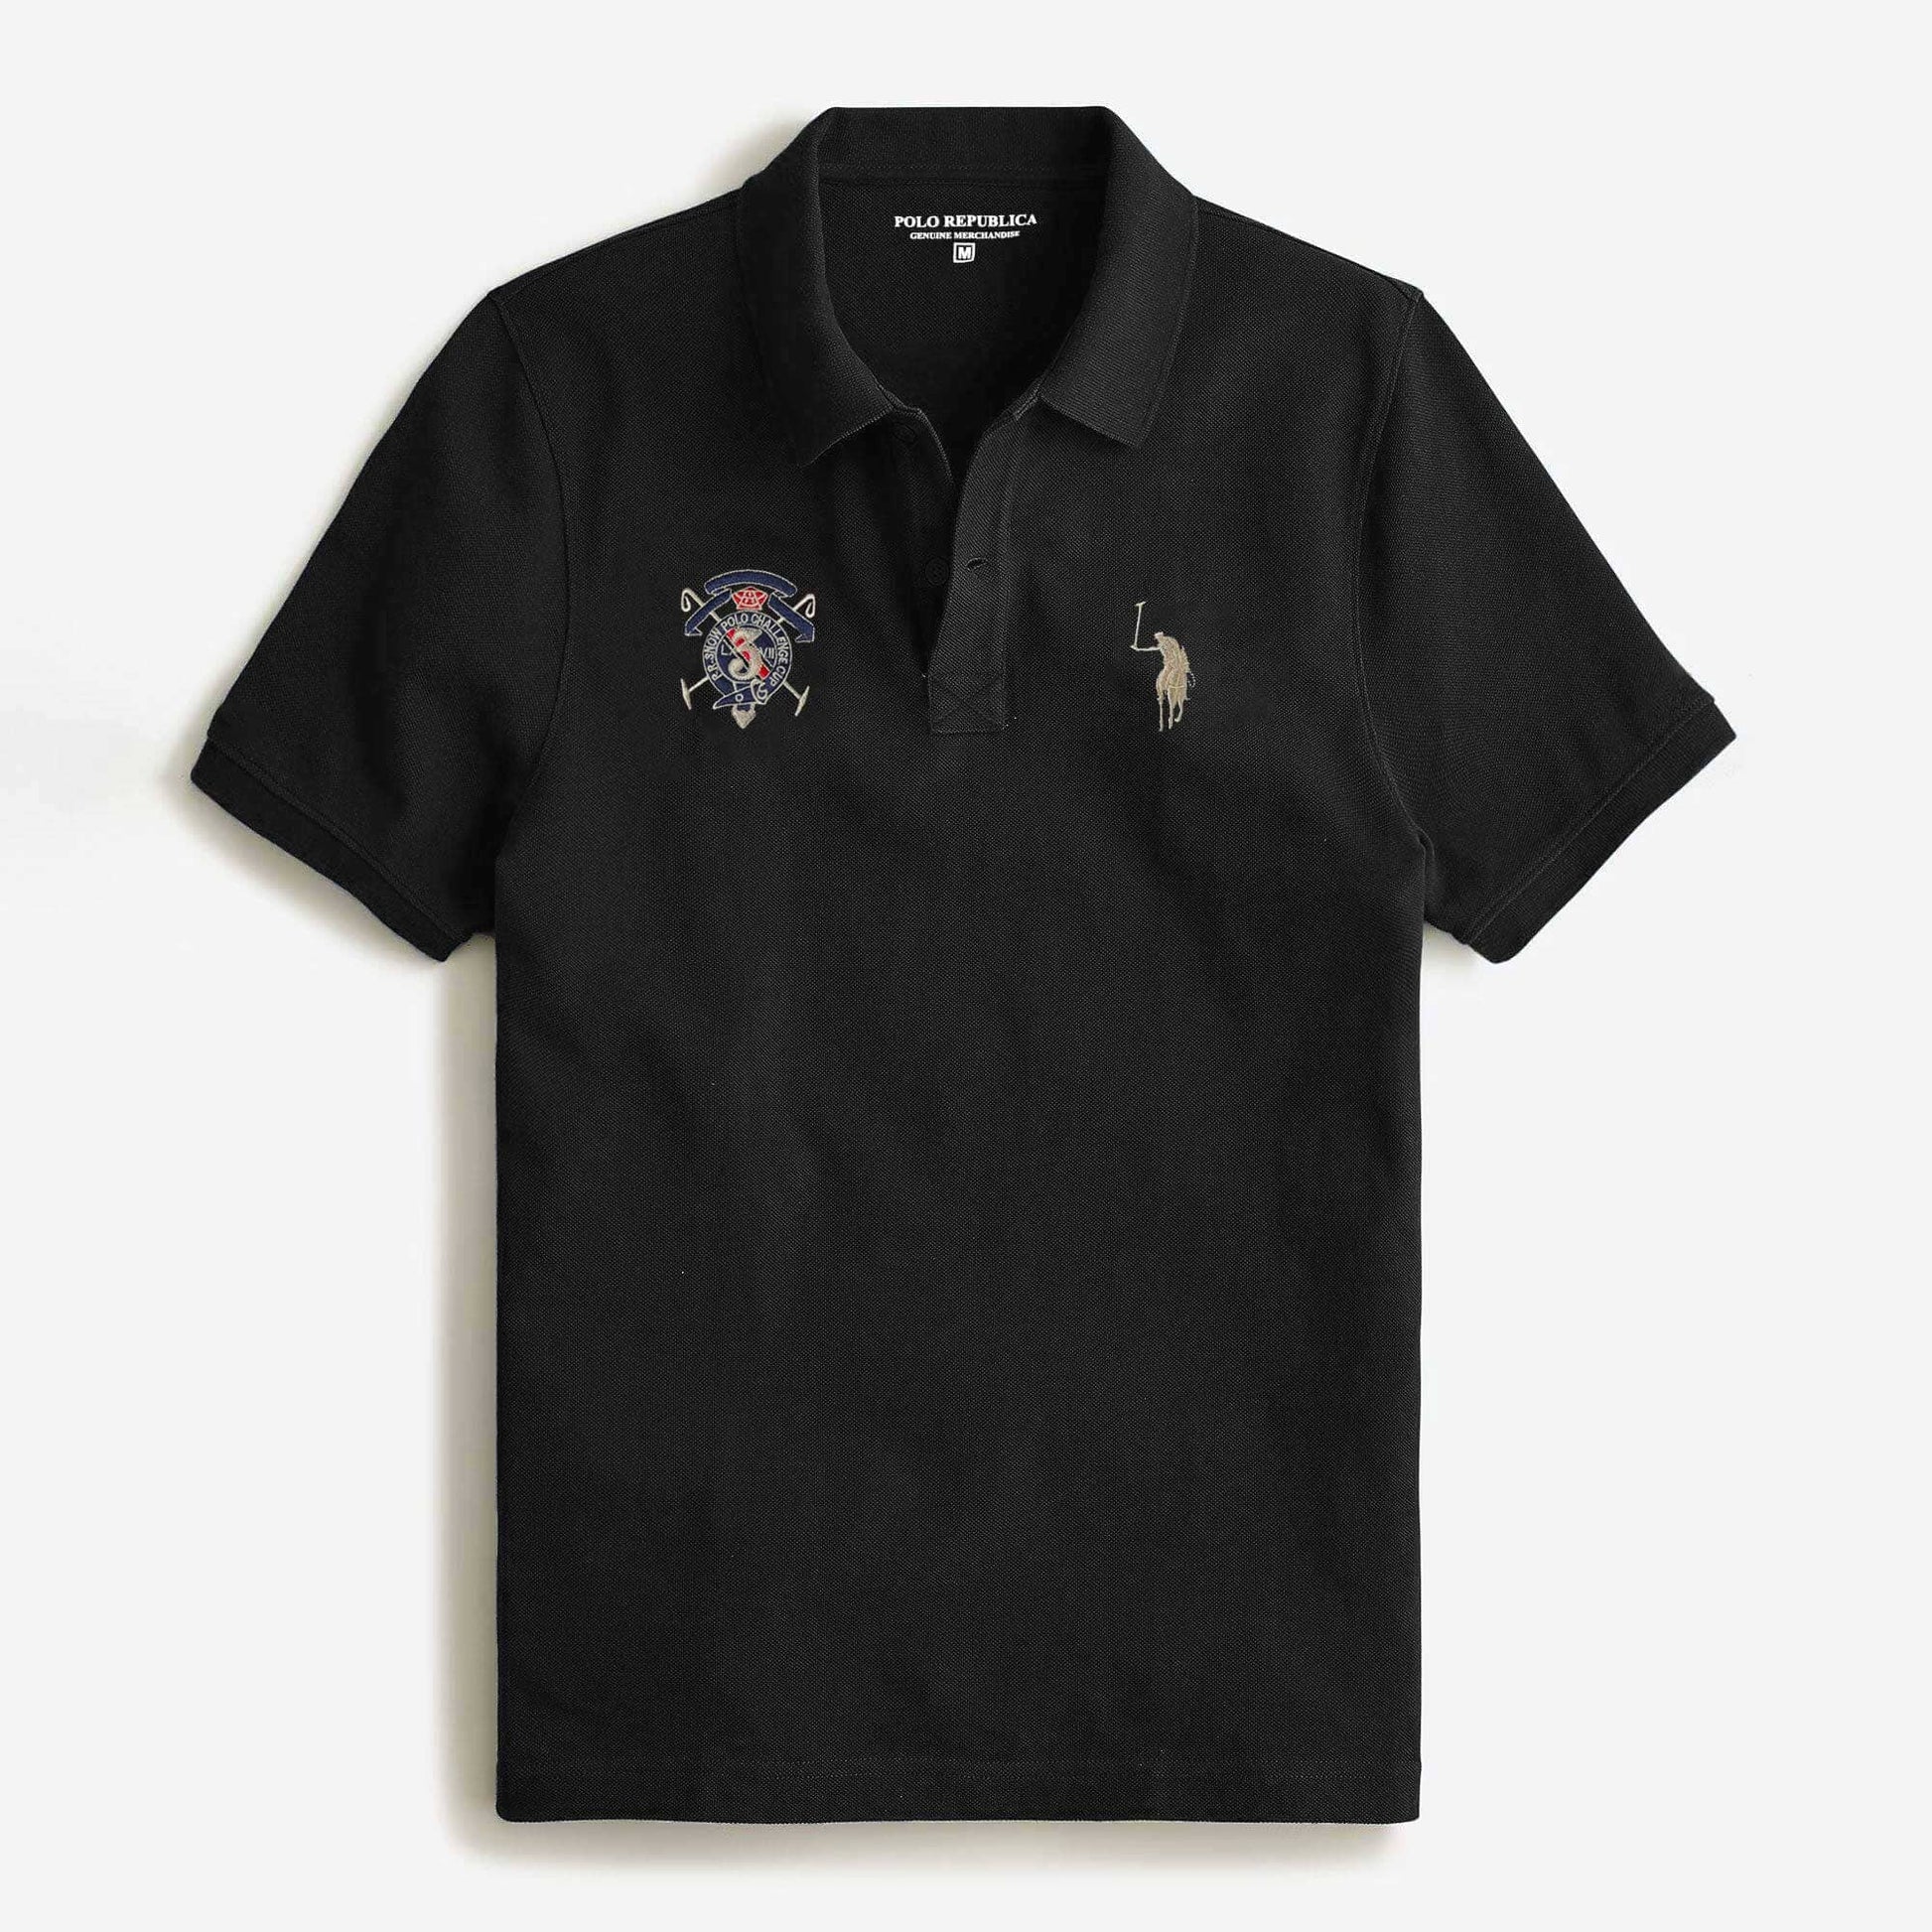 Polo Republica Men's Signature Pony & 3 Crest Embroidered Short Sleeve Polo Shirt